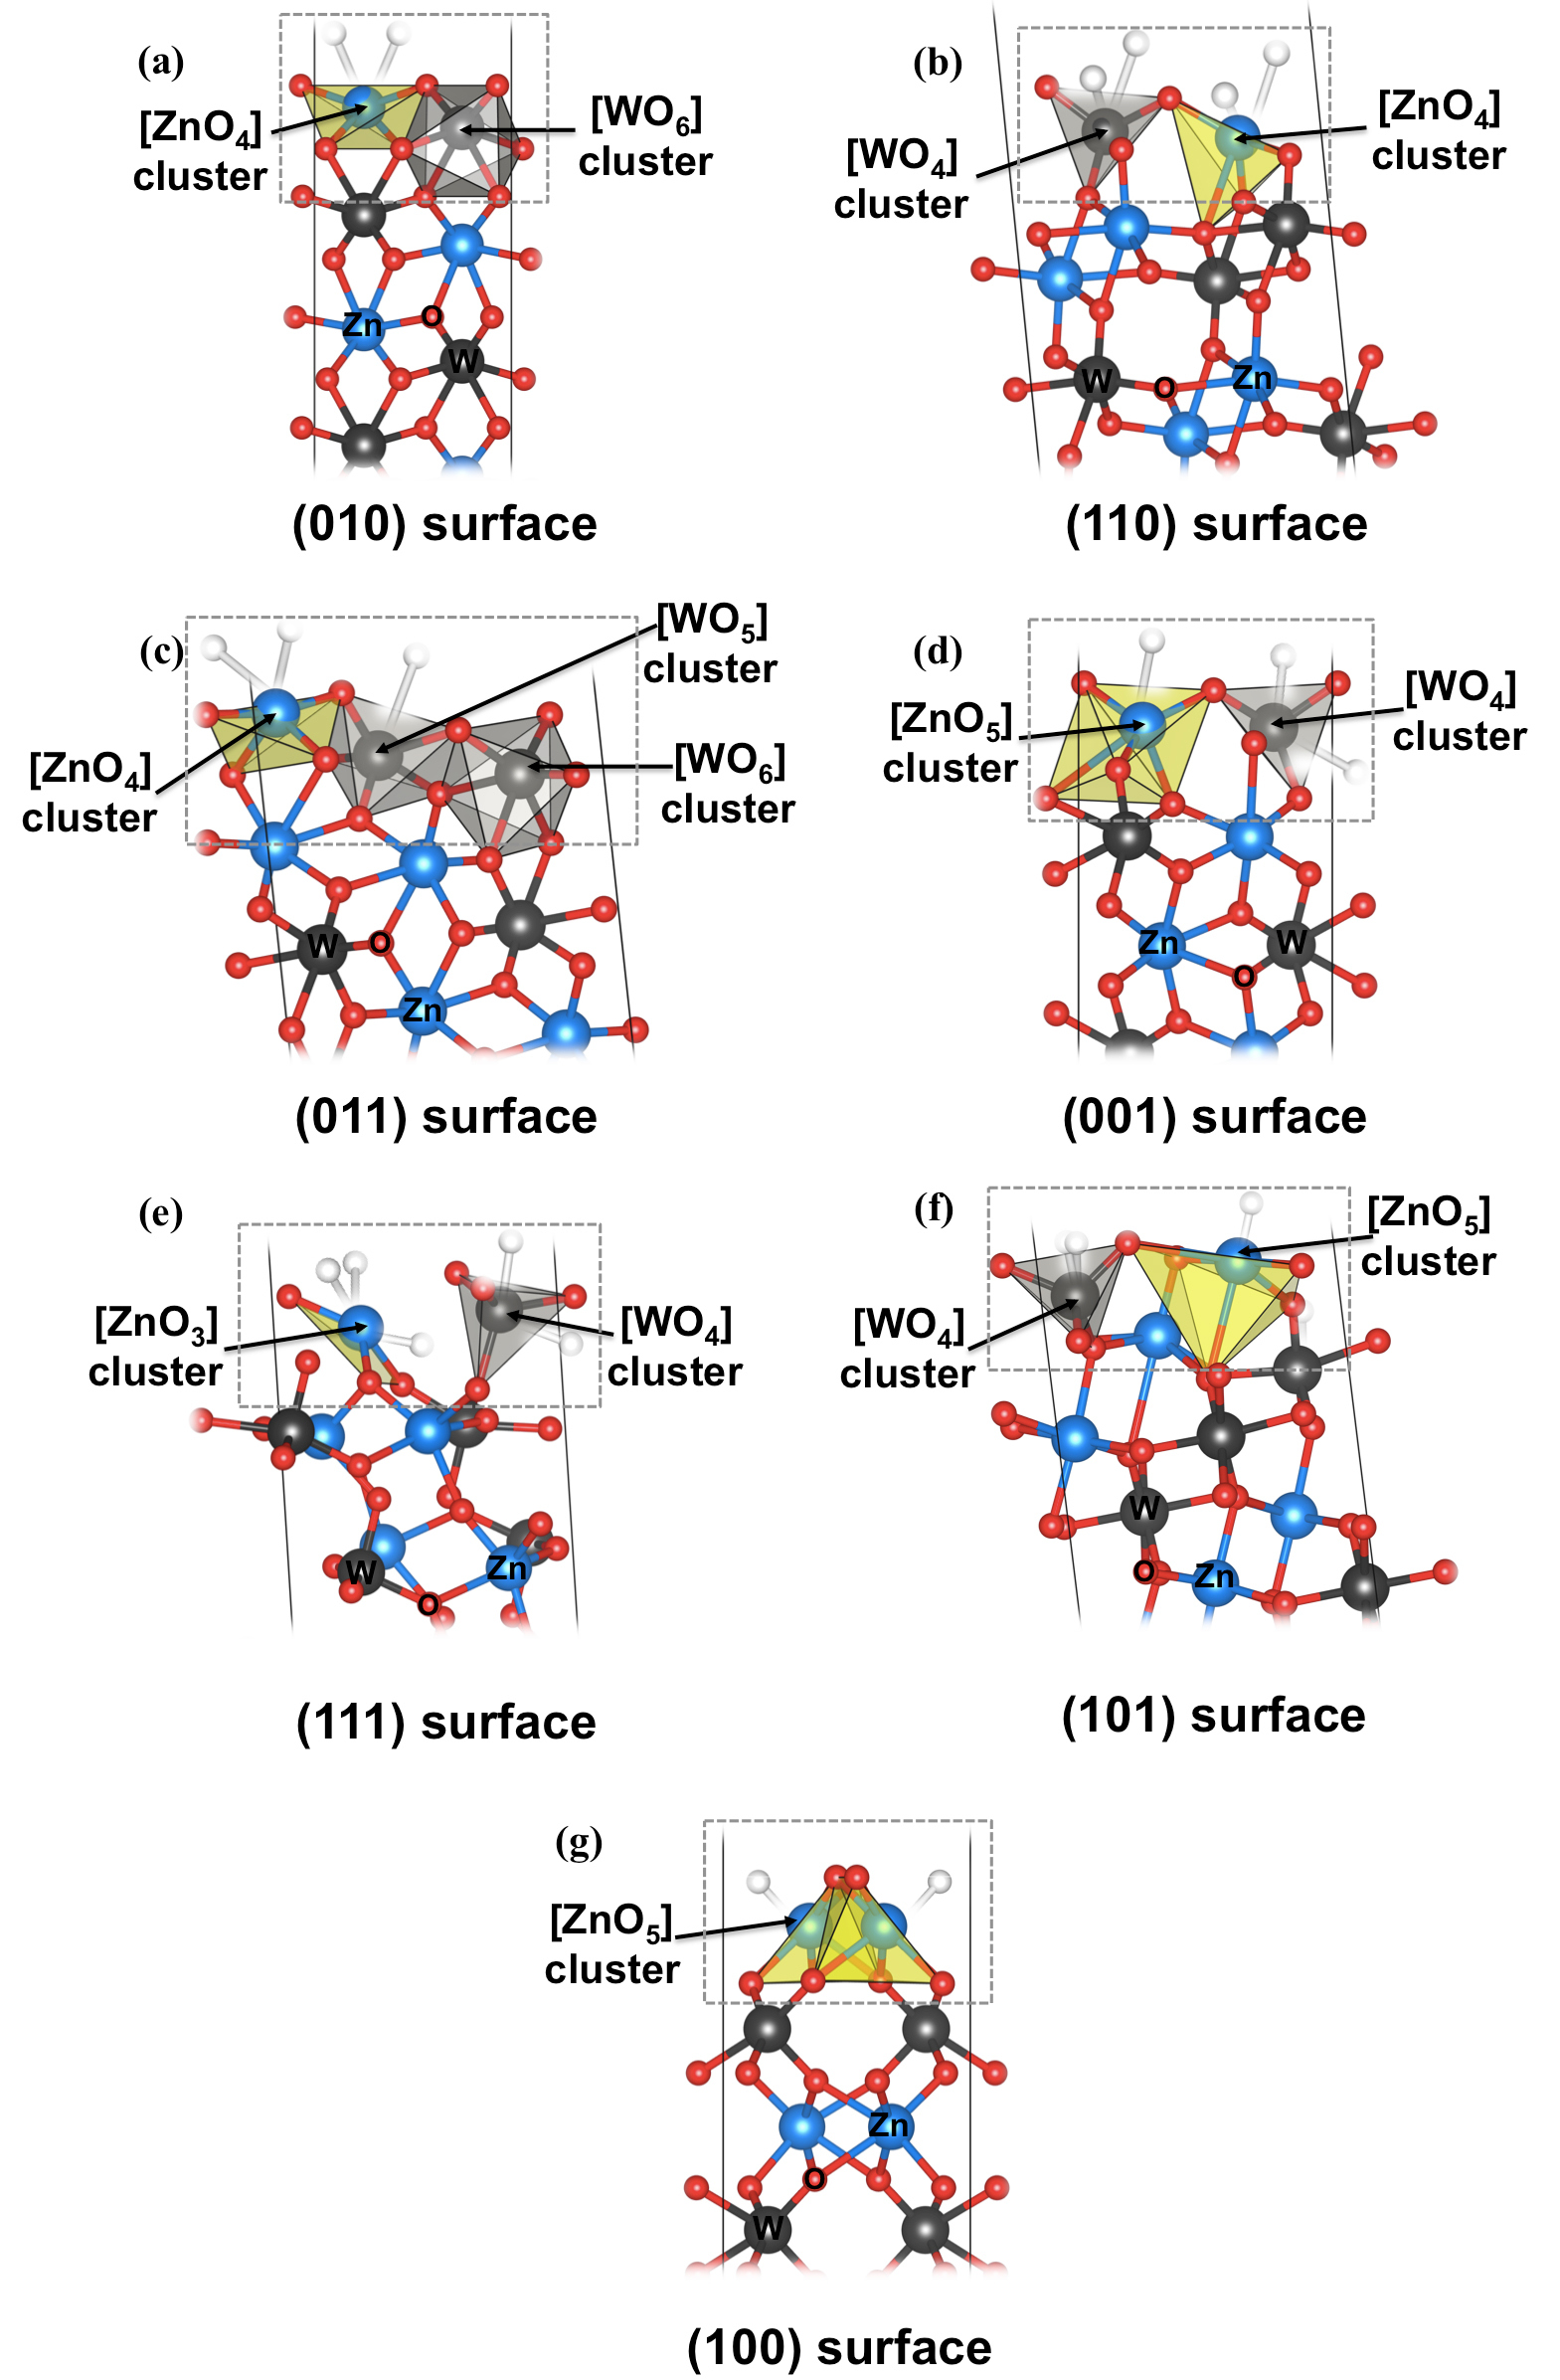 Figure 5. Surface models for monoclinic ZnWO<sub>4</sub> structure: (a) (010), (b) (110), (c) (011), (d) (001), (e) (111), (f) (101), and (g) (100) surfaces. The clusters at the top of each surface are highlighted.